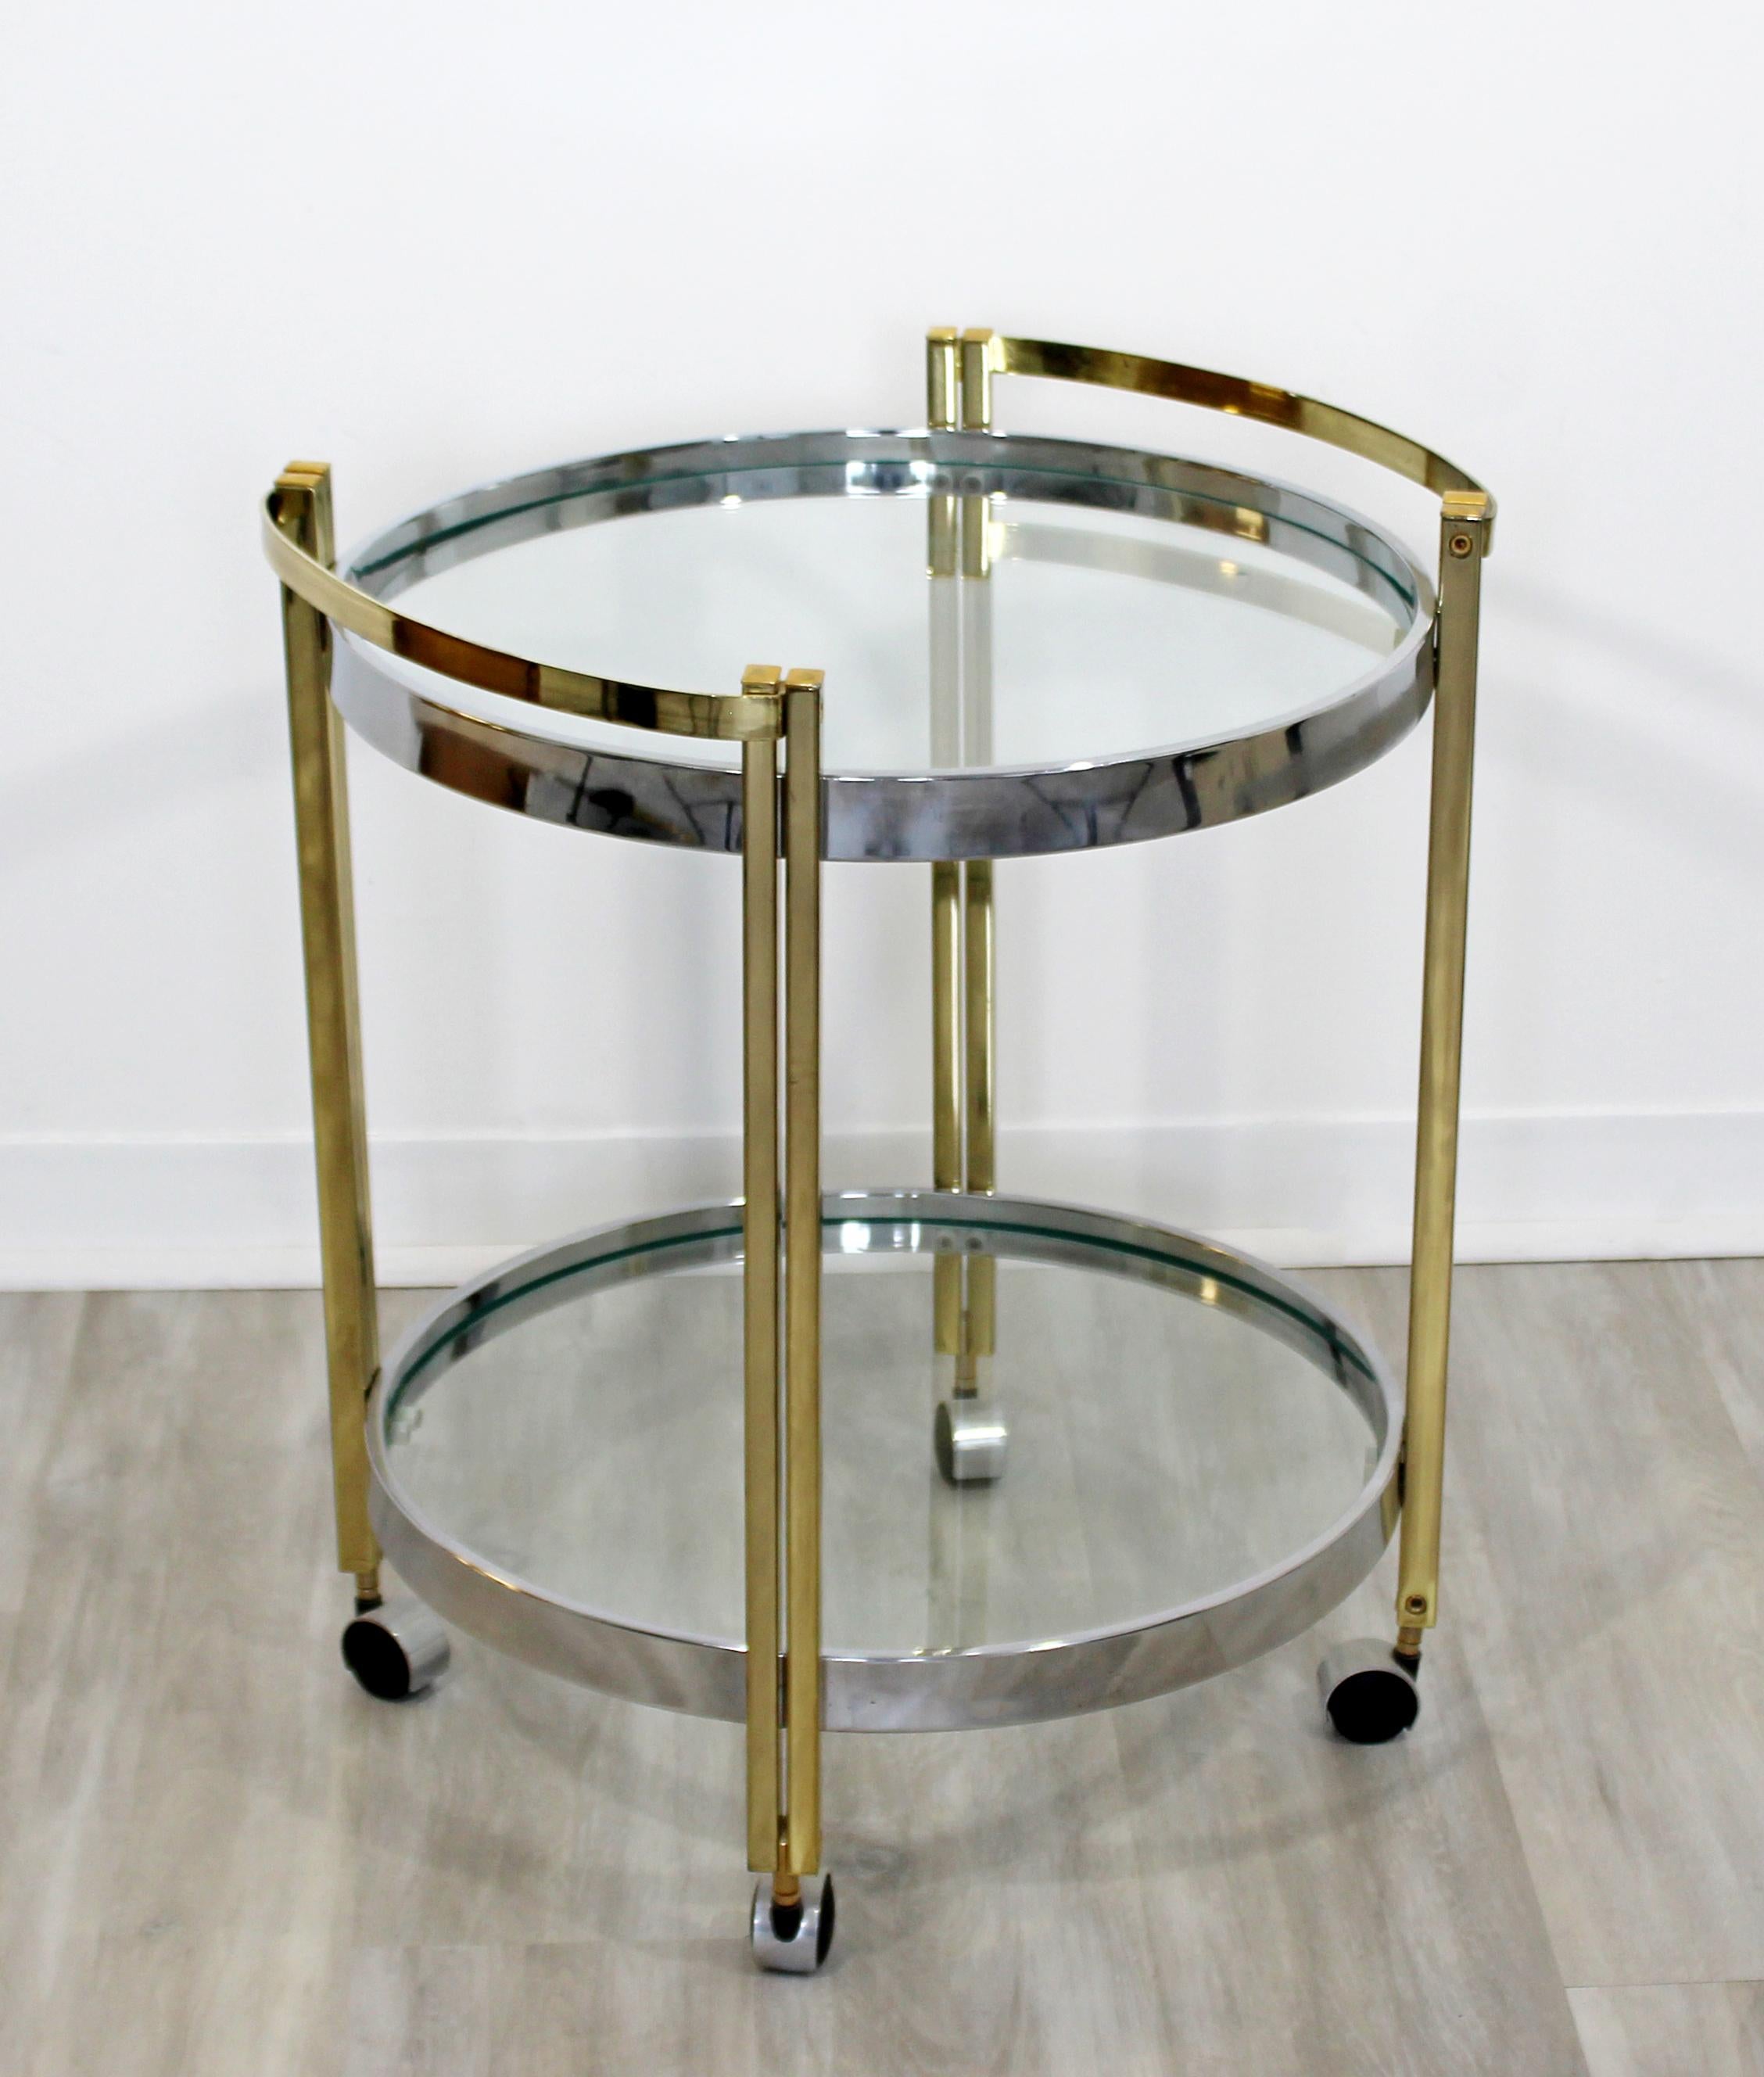 For your consideration is a phenomenal trolley cart, on wheels, made of chrome and brass and with two glass shelves, circa the 1970s. In very good vintage condition. The dimensions are 20.5